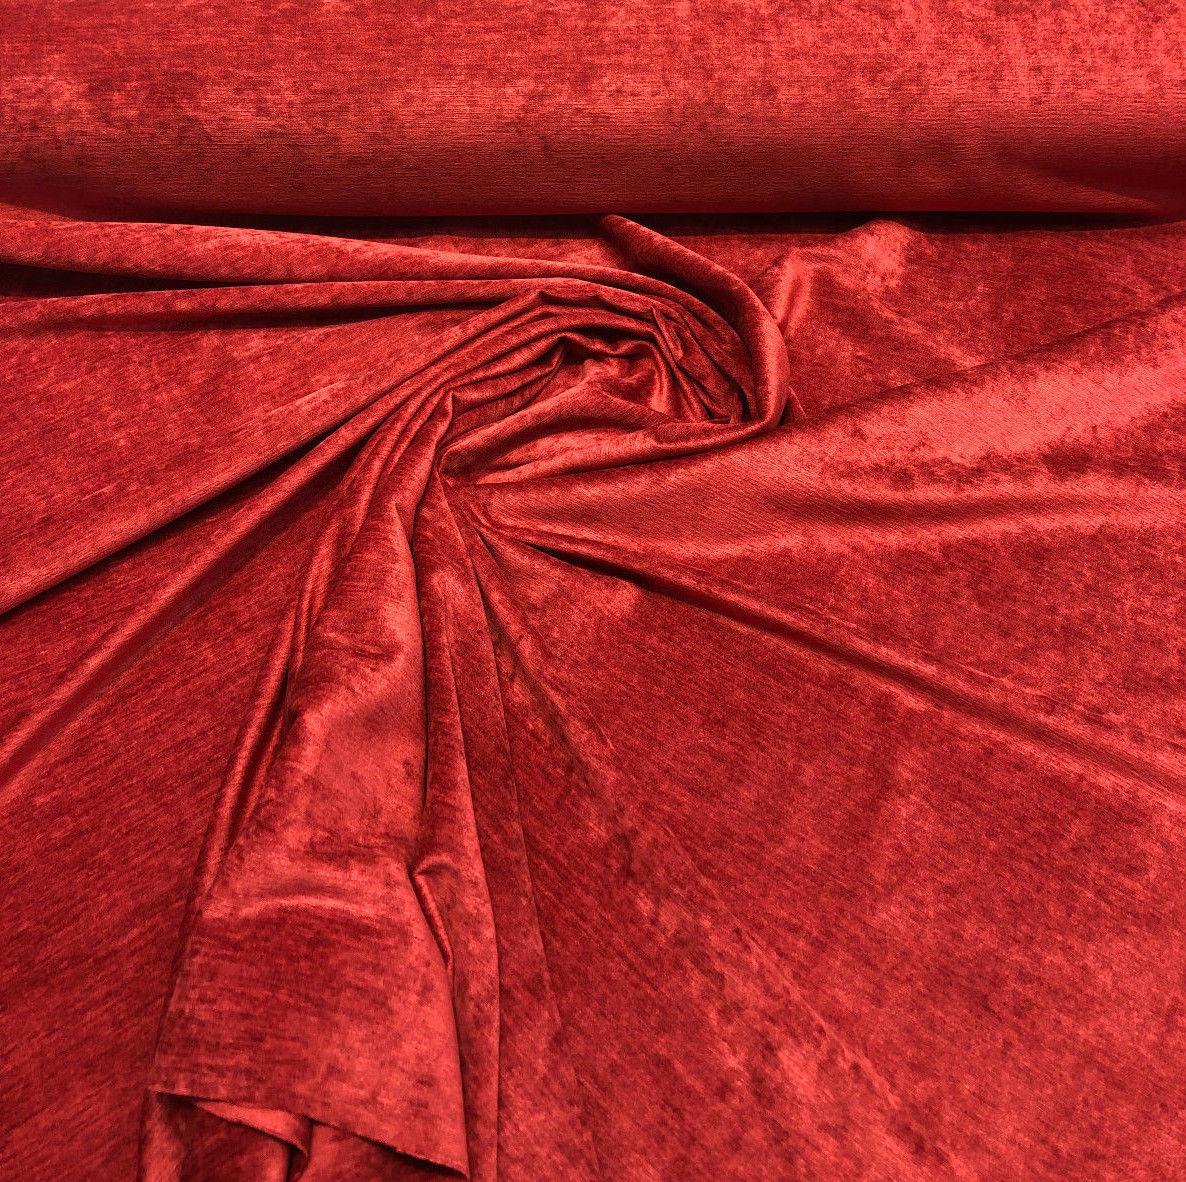 Solid Red Chili Evens Chenille Upholstery Fabric By the yard – Affordable  Home Fabrics